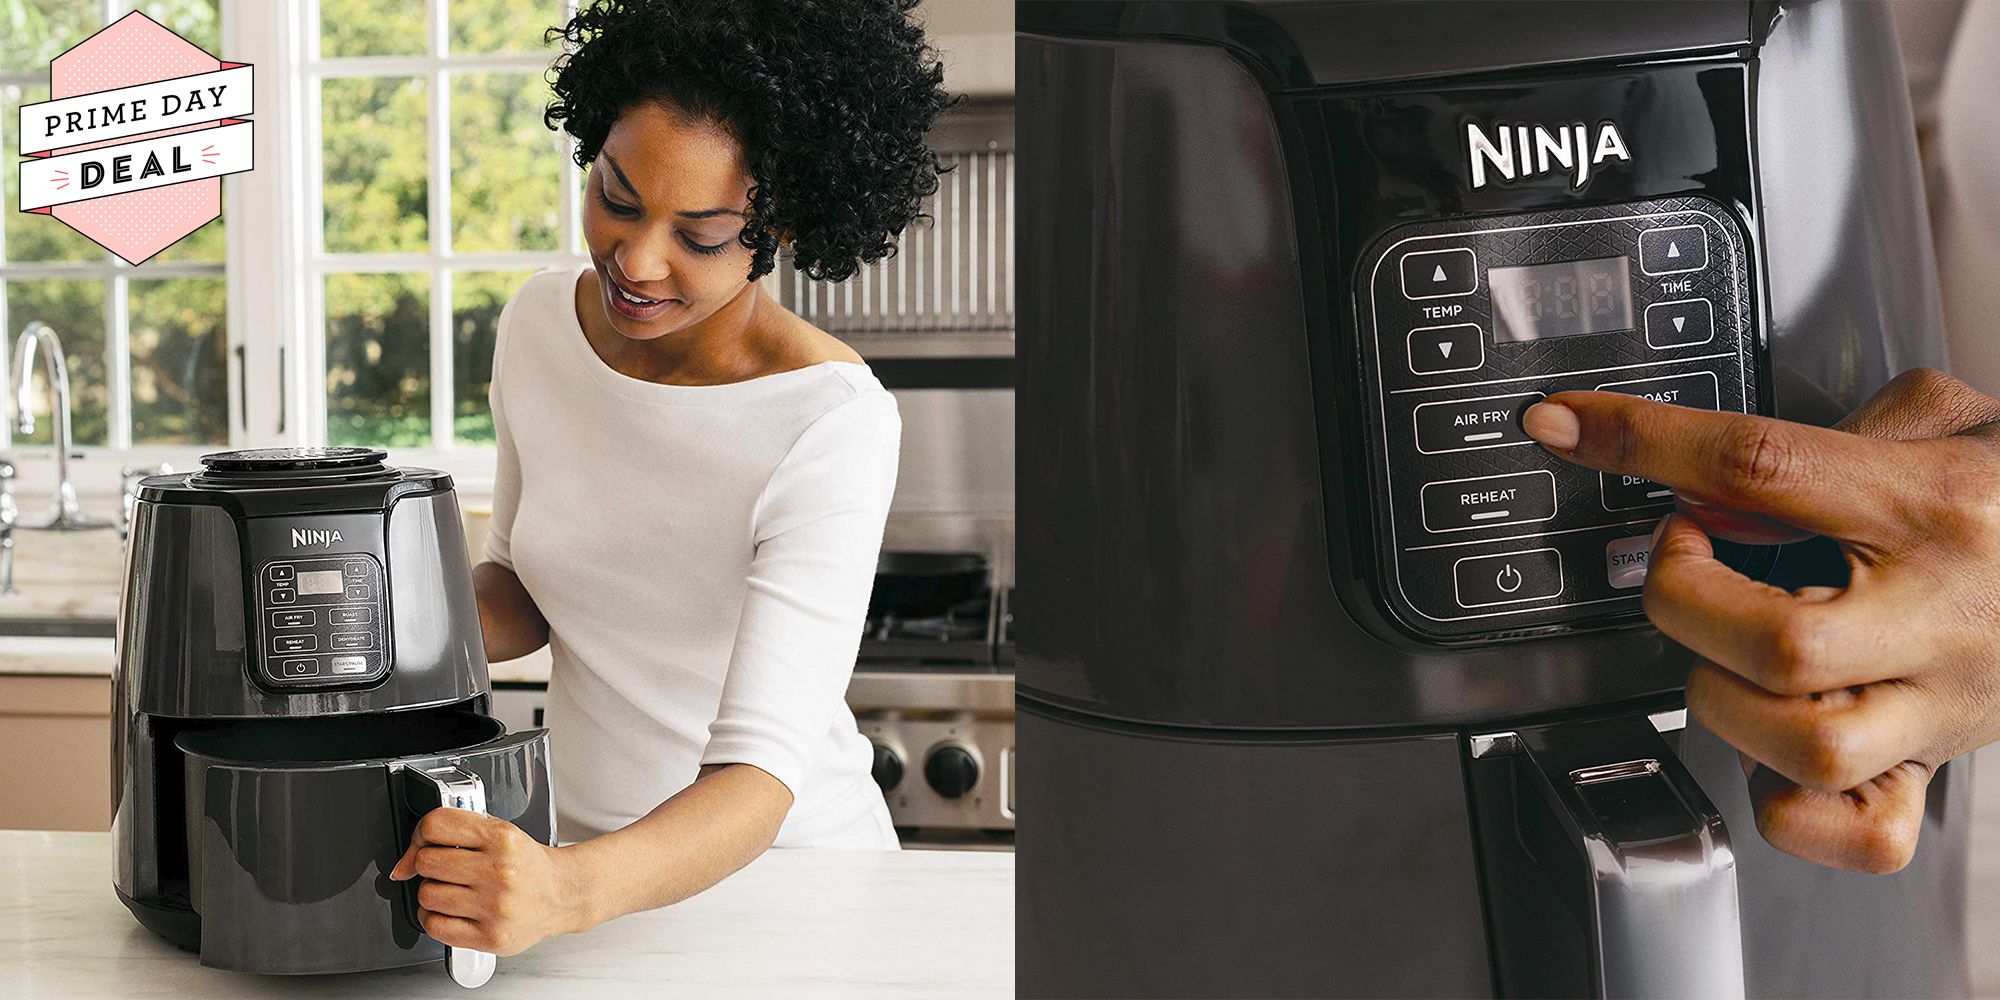 https://storables.com/wp-content/uploads/2023/07/10-amazing-air-fryer-prime-day-deal-for-2023-1690326730.jpg